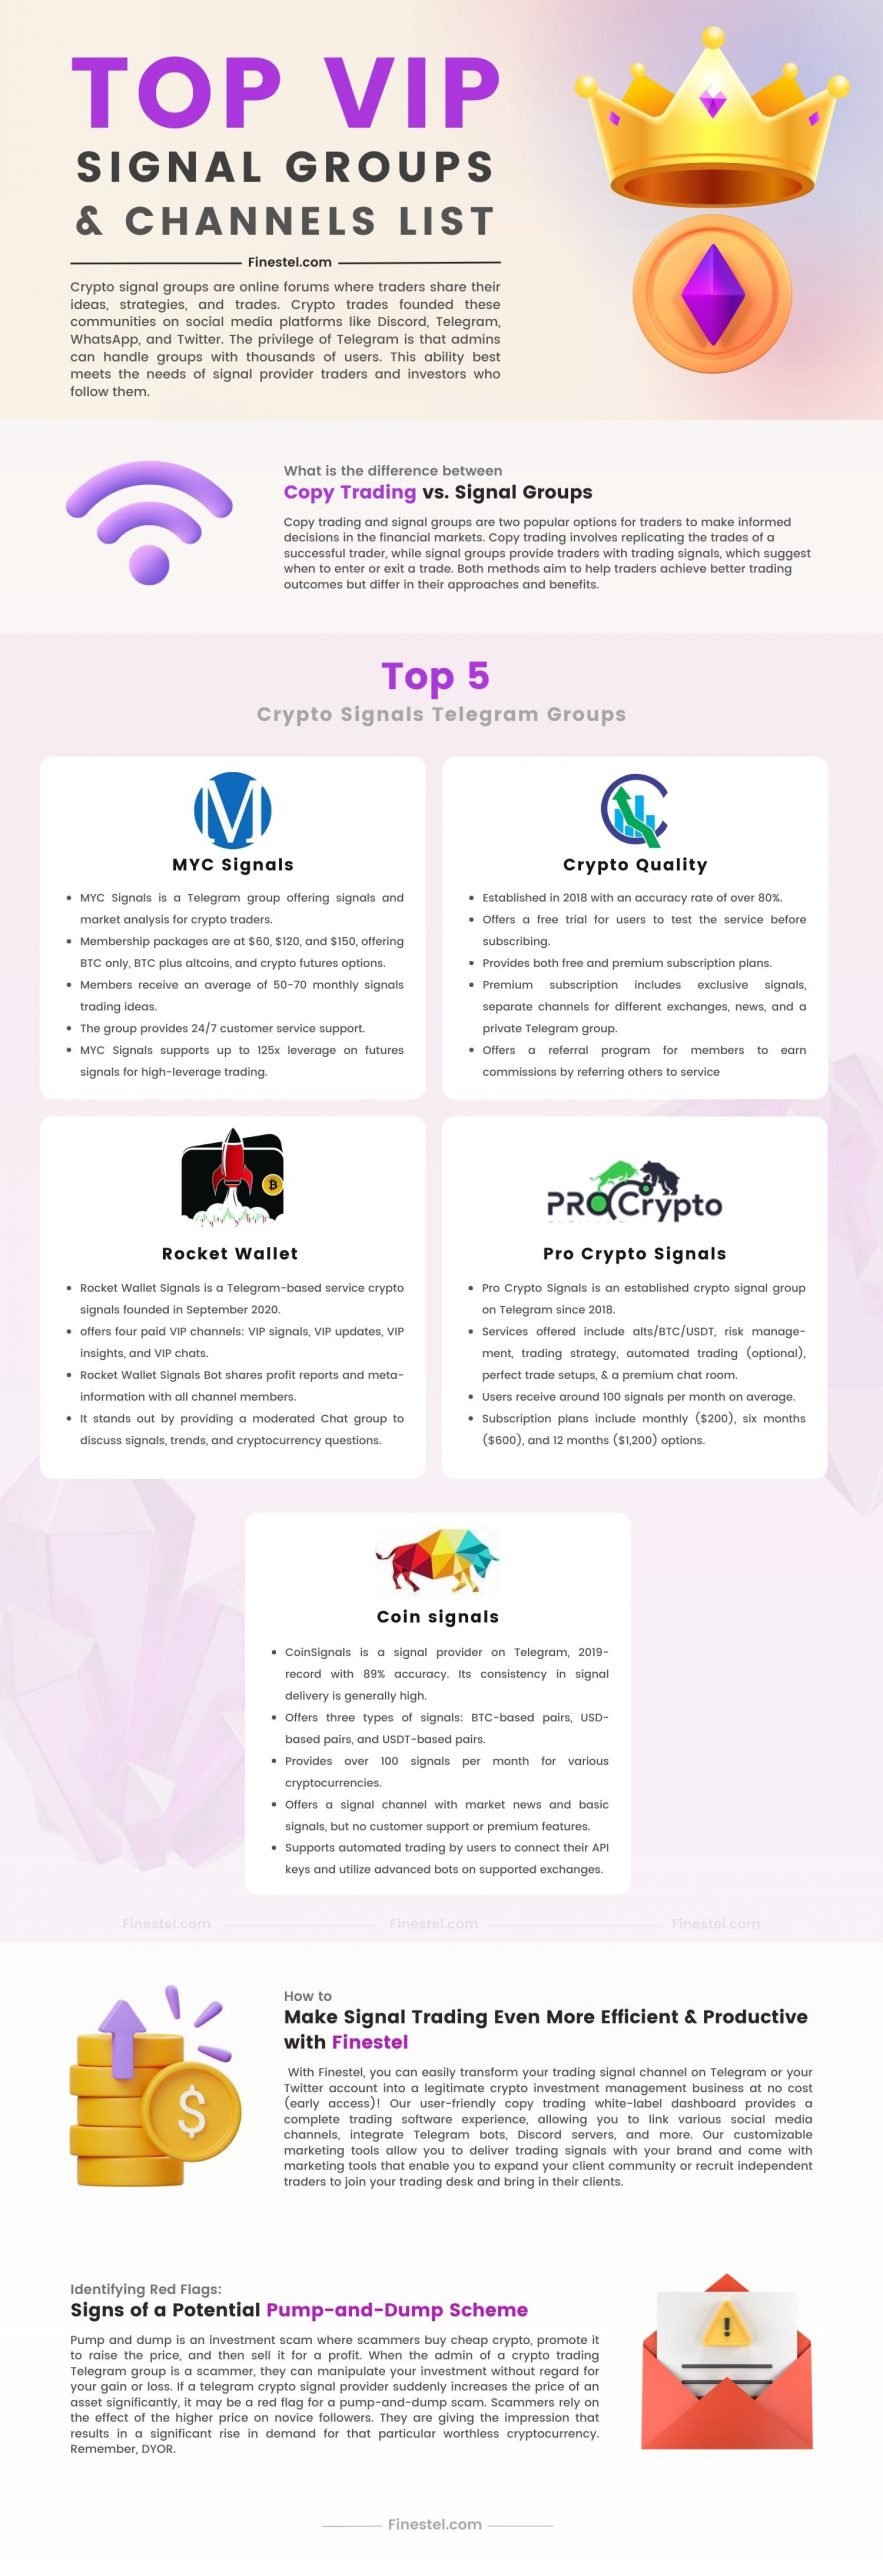 Top 5 Crypto Signal Groups Infographic